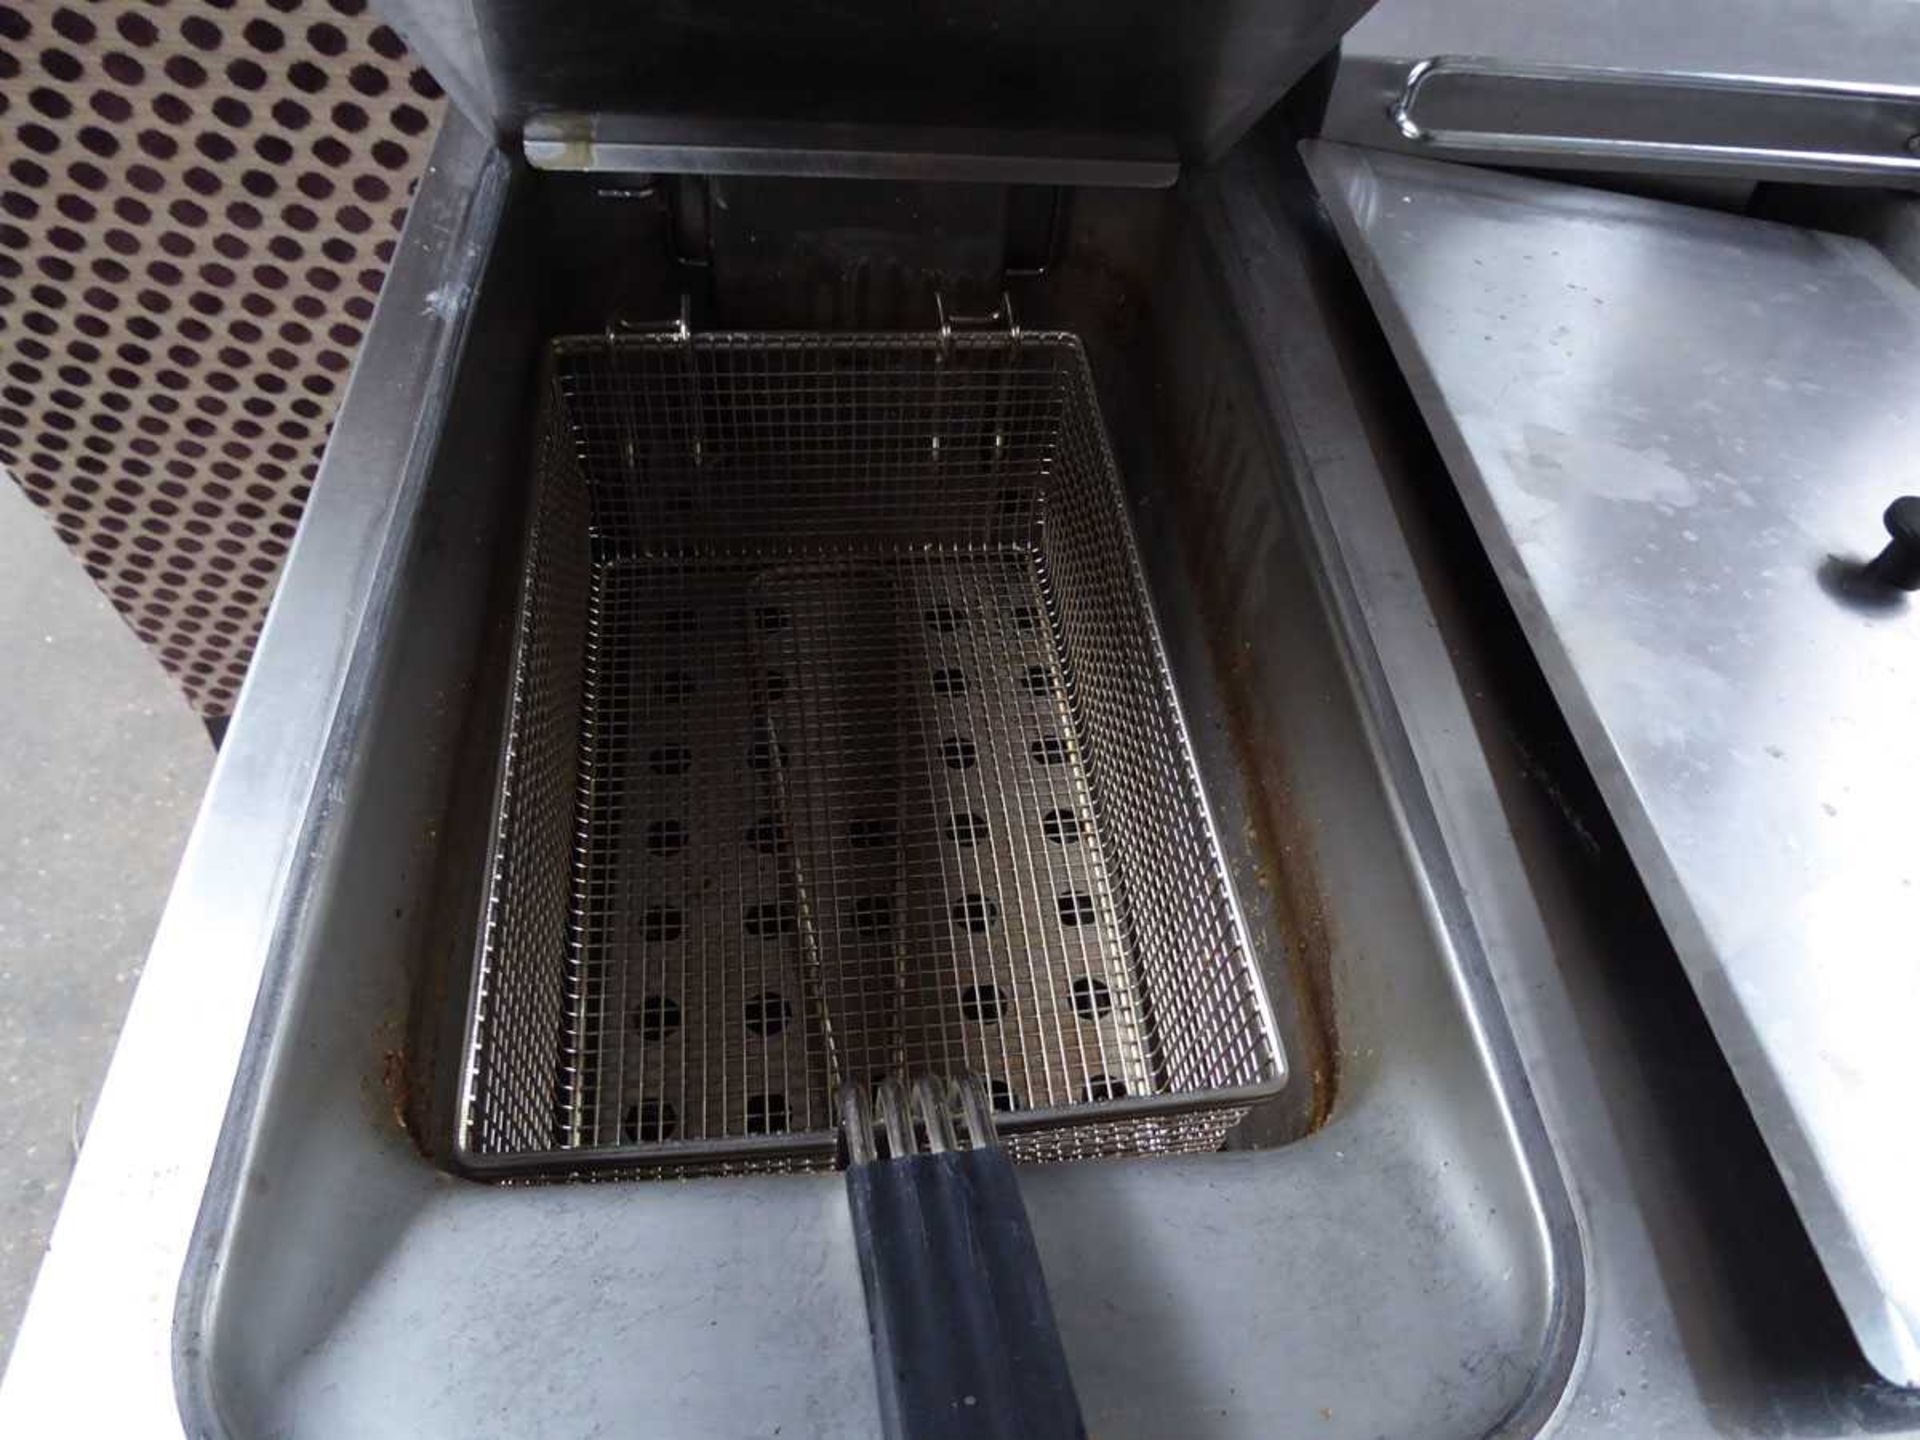 60cm electric Lincat 2 well fryer with 2 baskets - Image 2 of 3